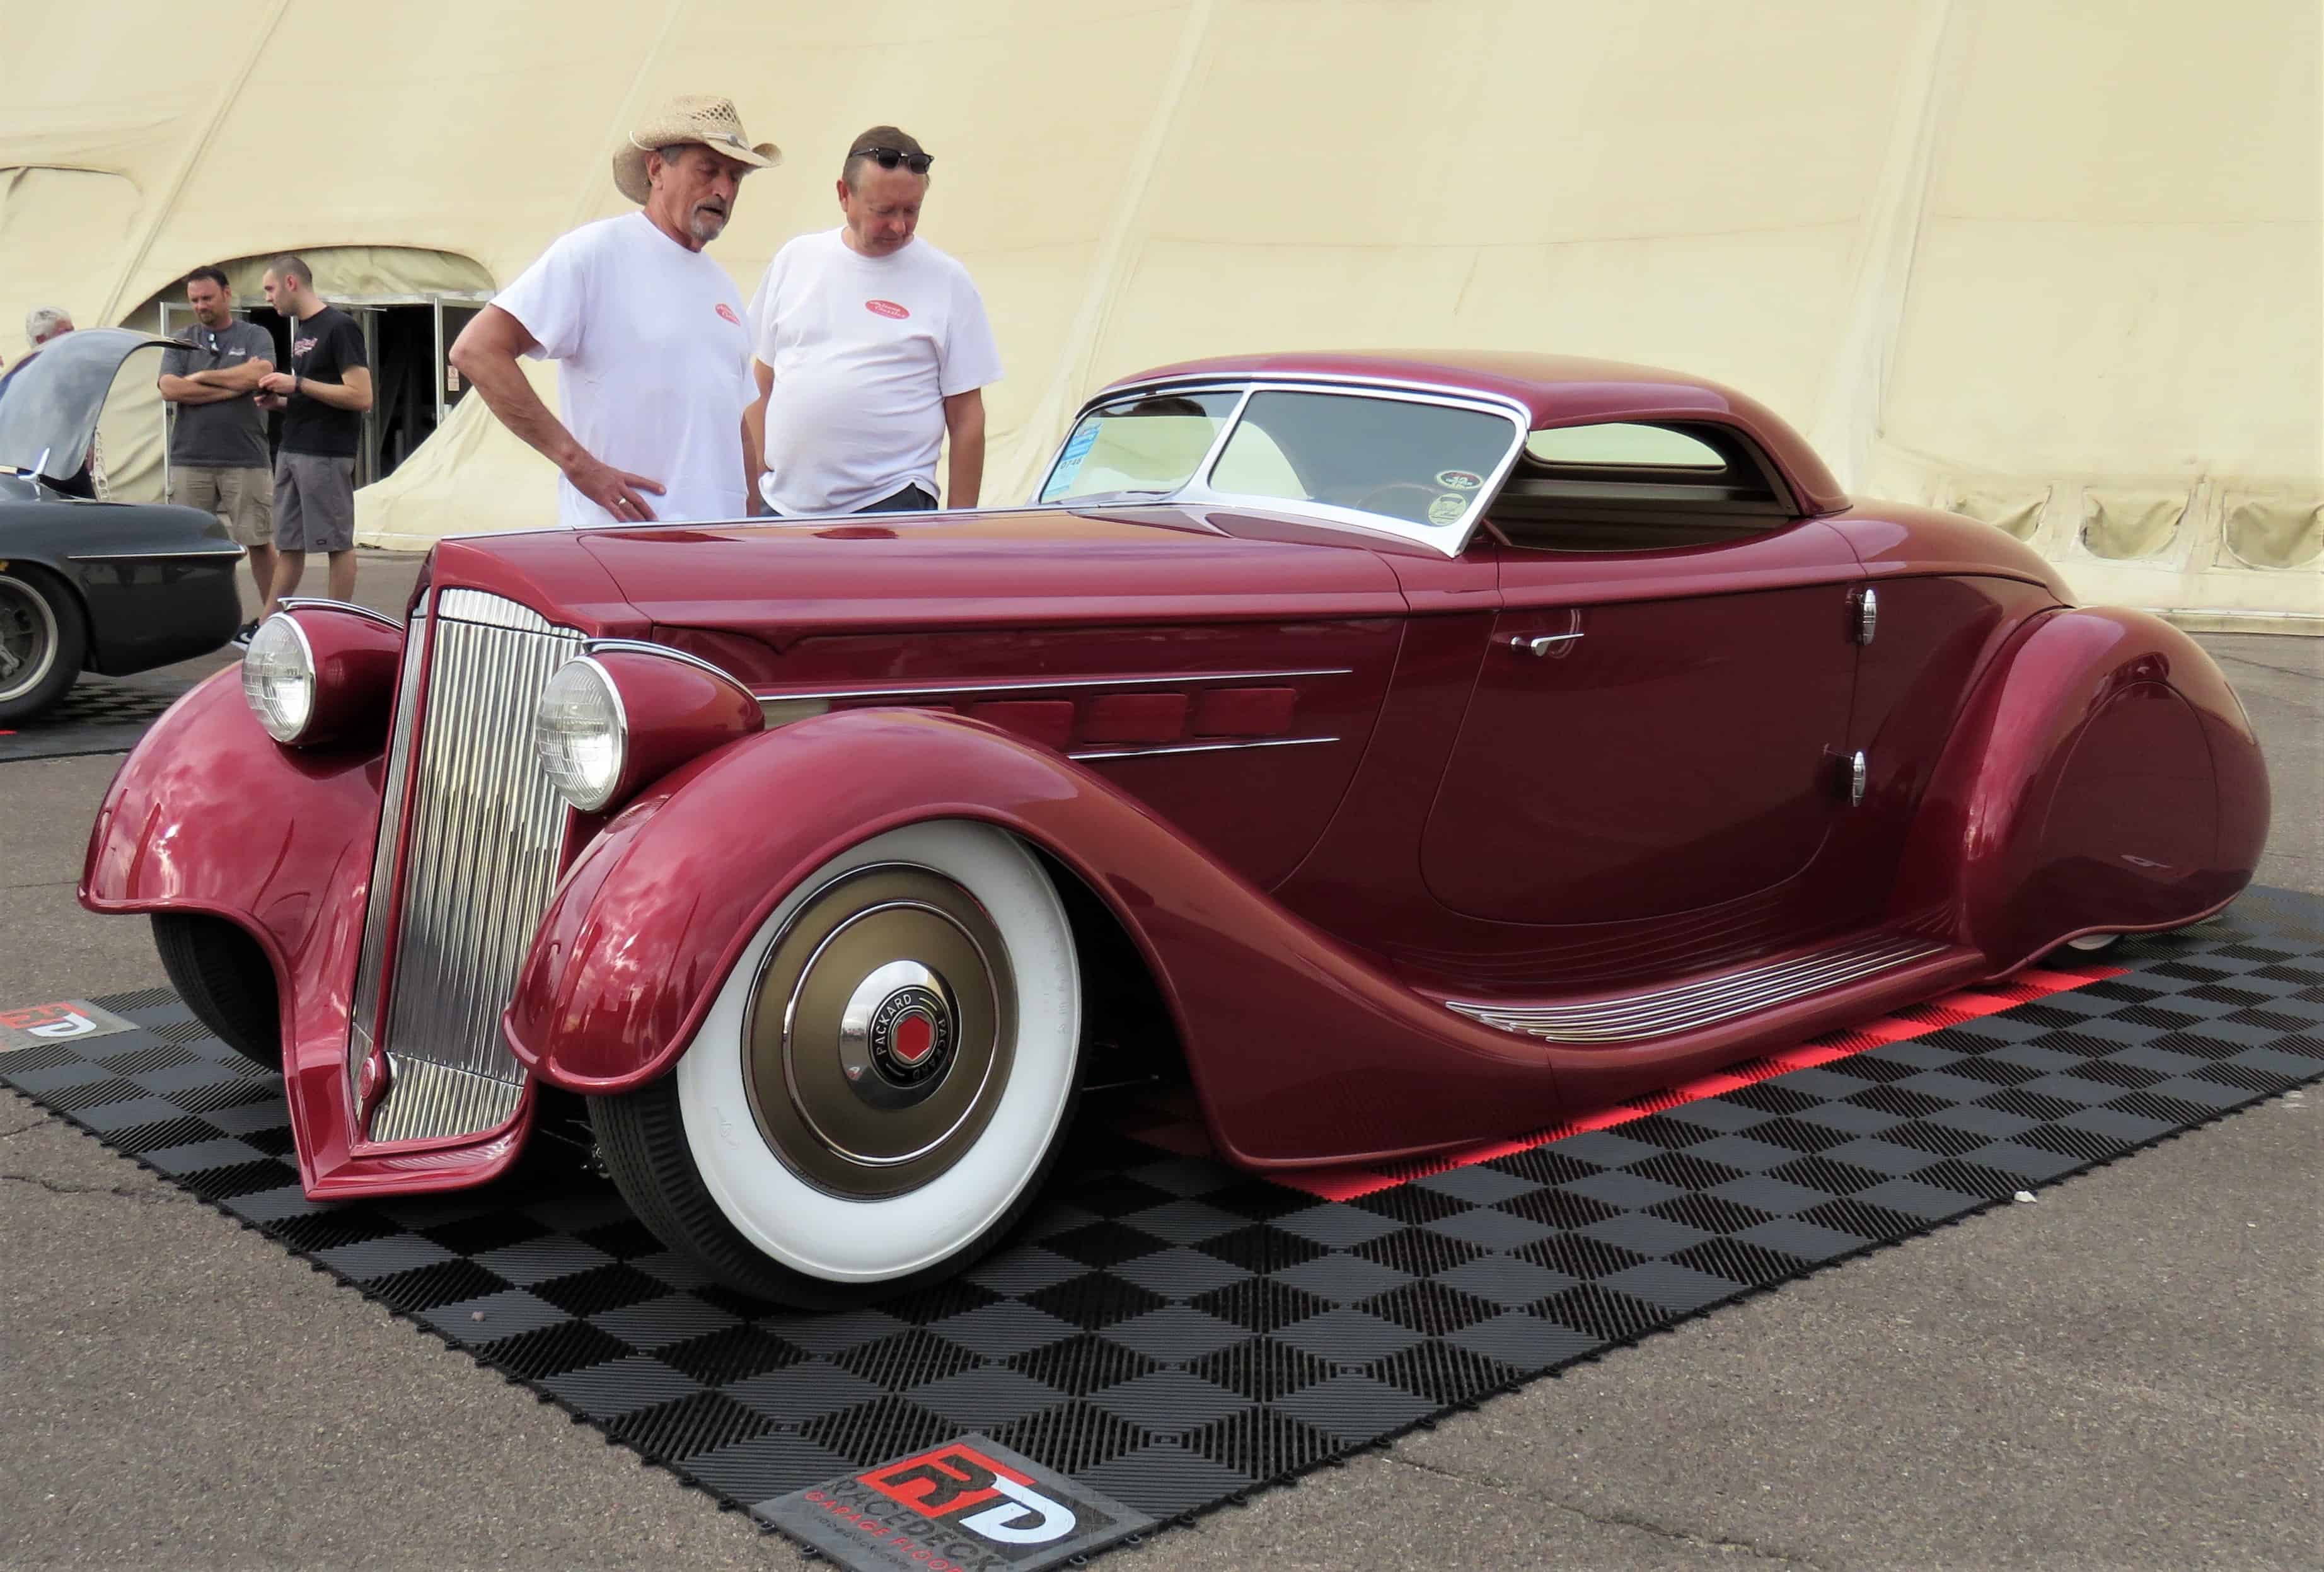 Goodguys grand finale in Scottsdale | ClassicCars.com Journal